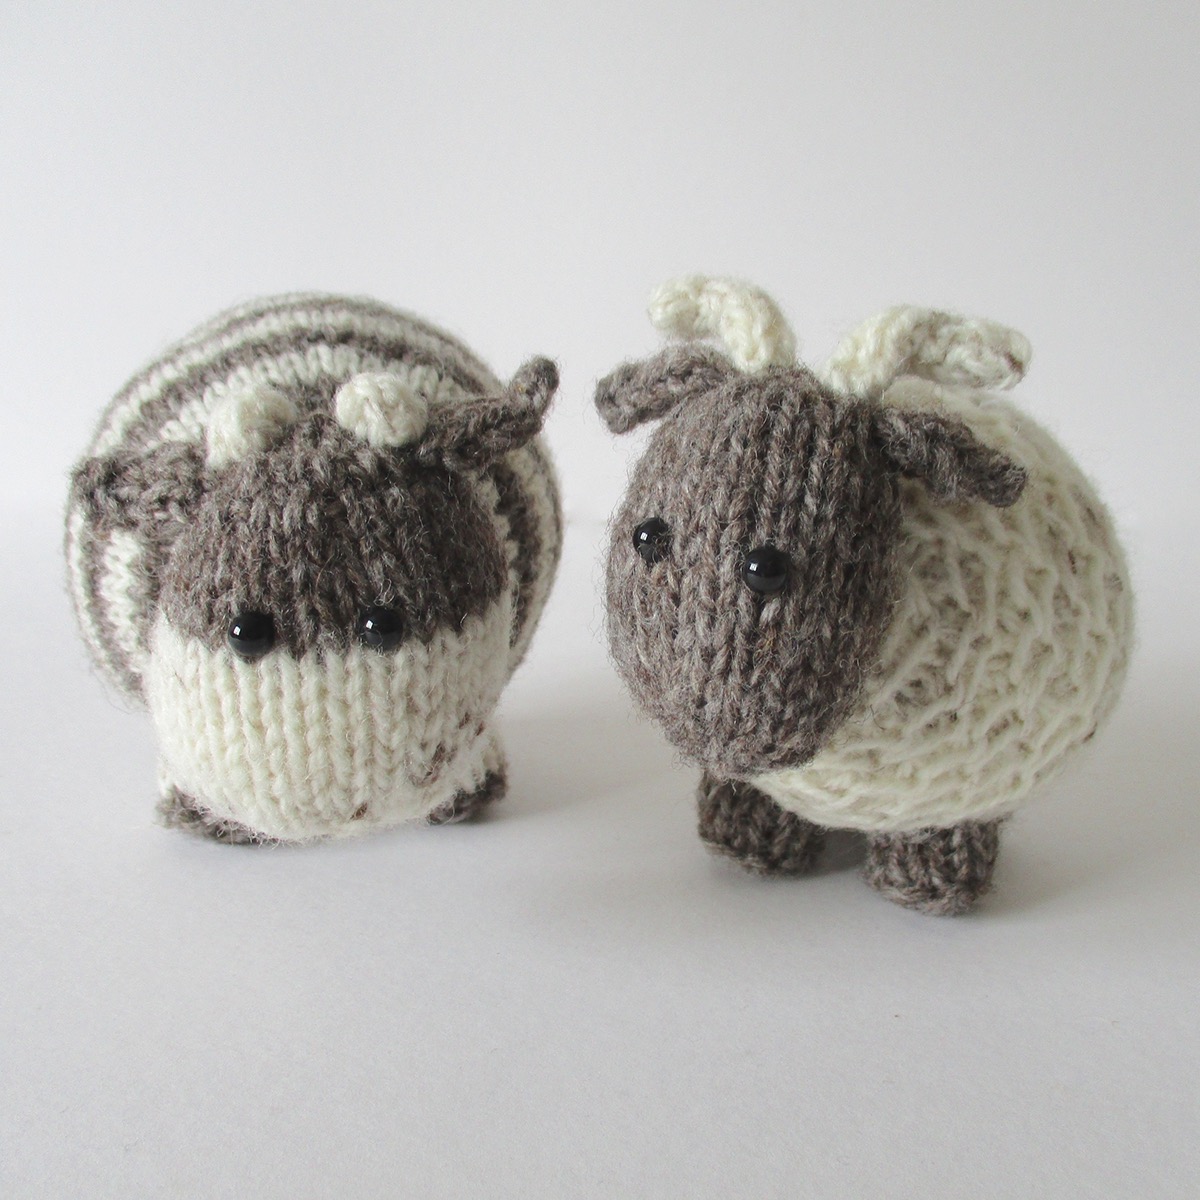 Bramble Goat and Chestnut Cow on Behance